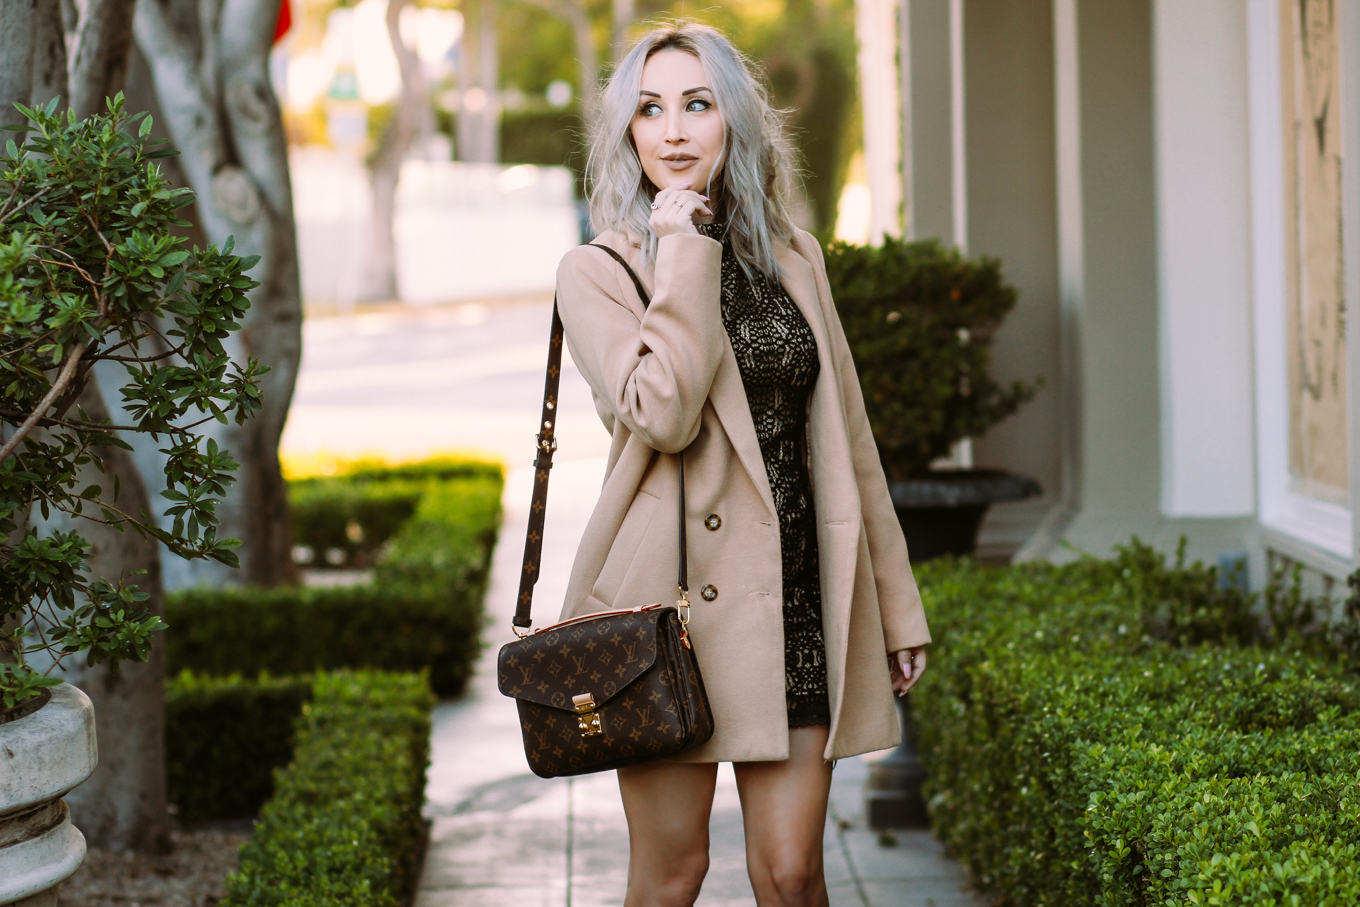 Blondie in the City | Halter Lace Dress, Camel coat, Louis Vuitton Bag | Chic #OOTD